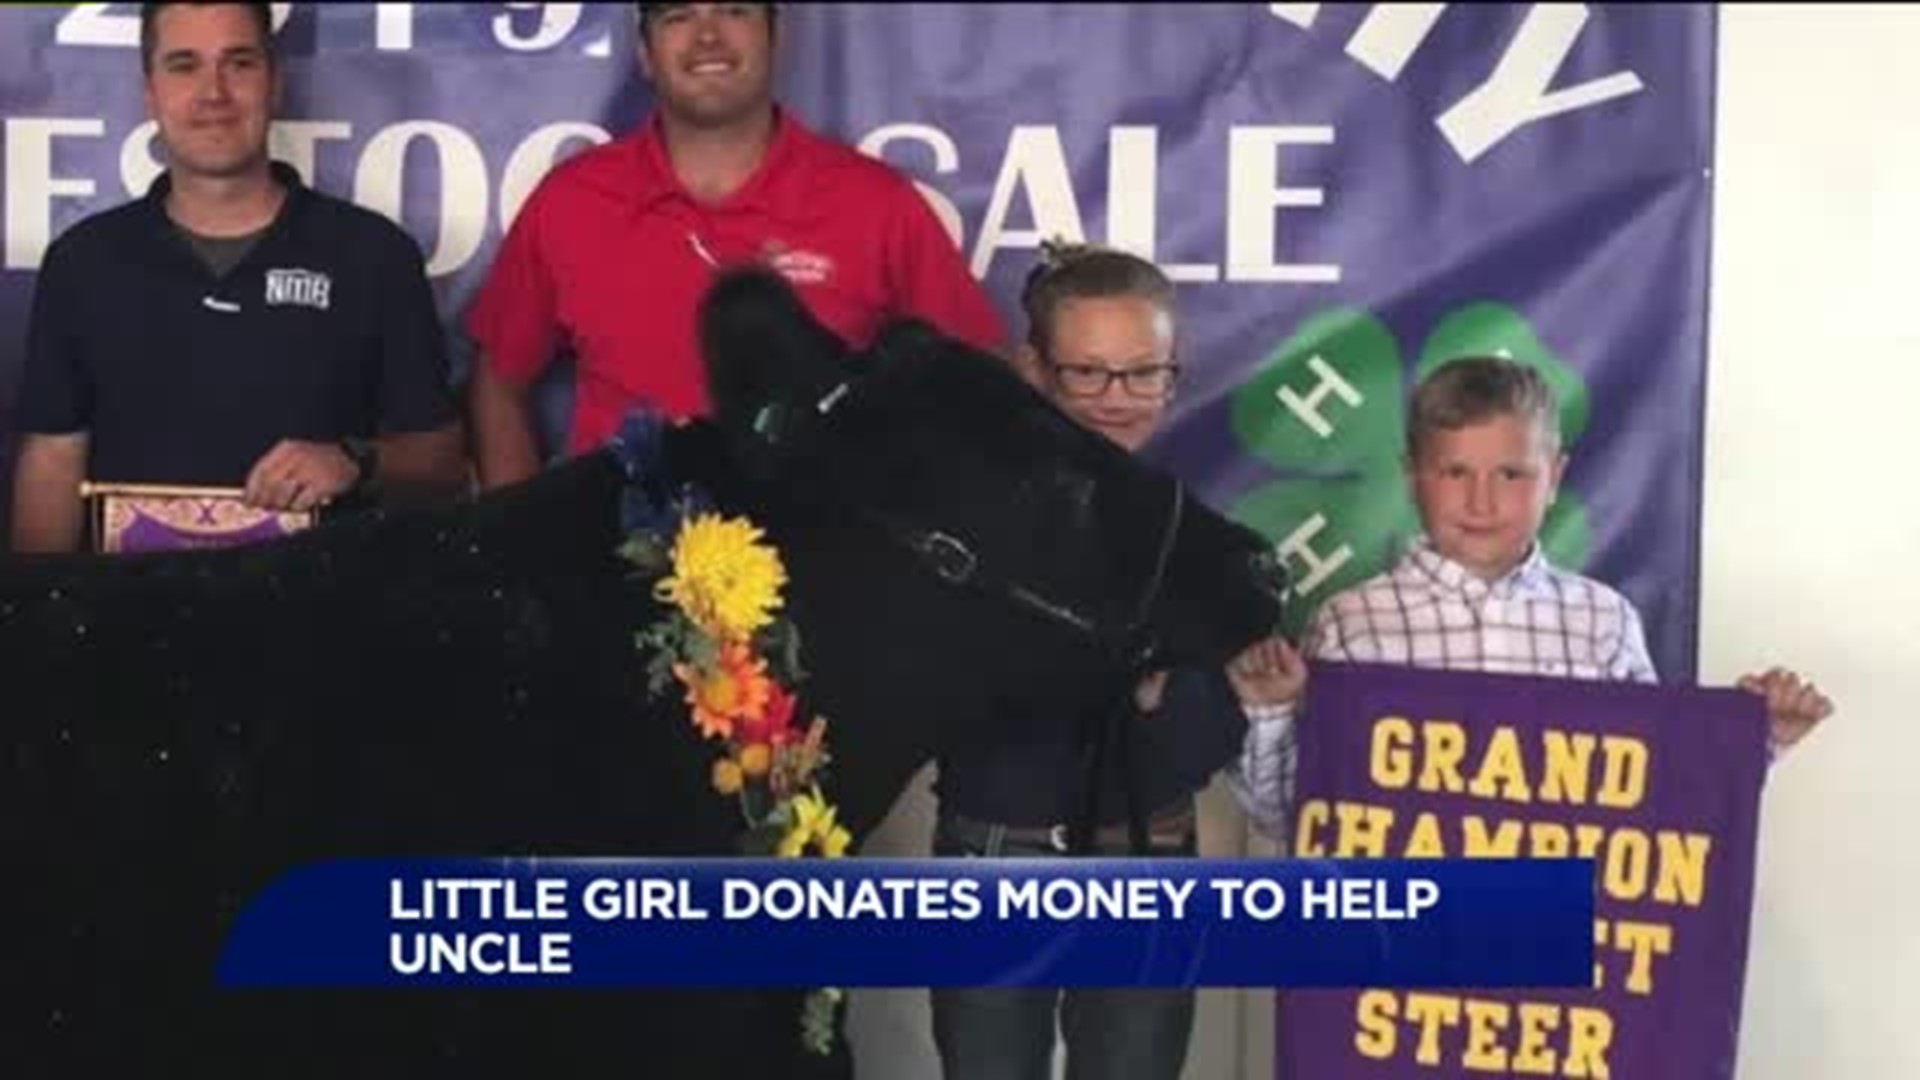 Young Girl Donates Steer Profits to Uncle in Need